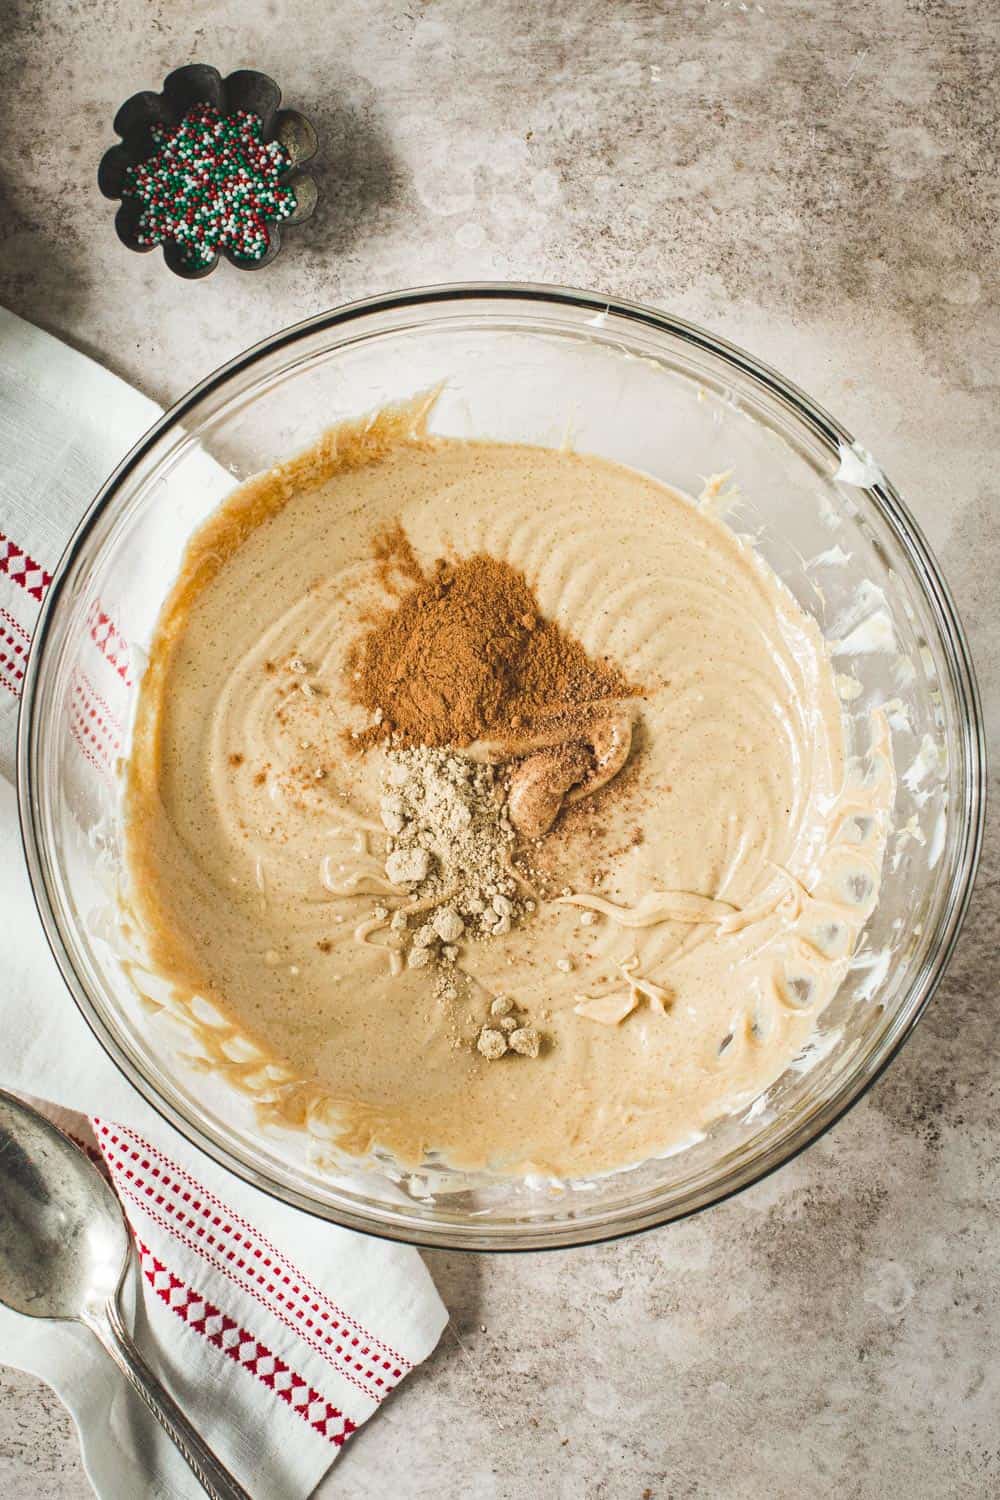 Gingerbread cheesecake dip cheesecake ingredients in glass mixing bowl.